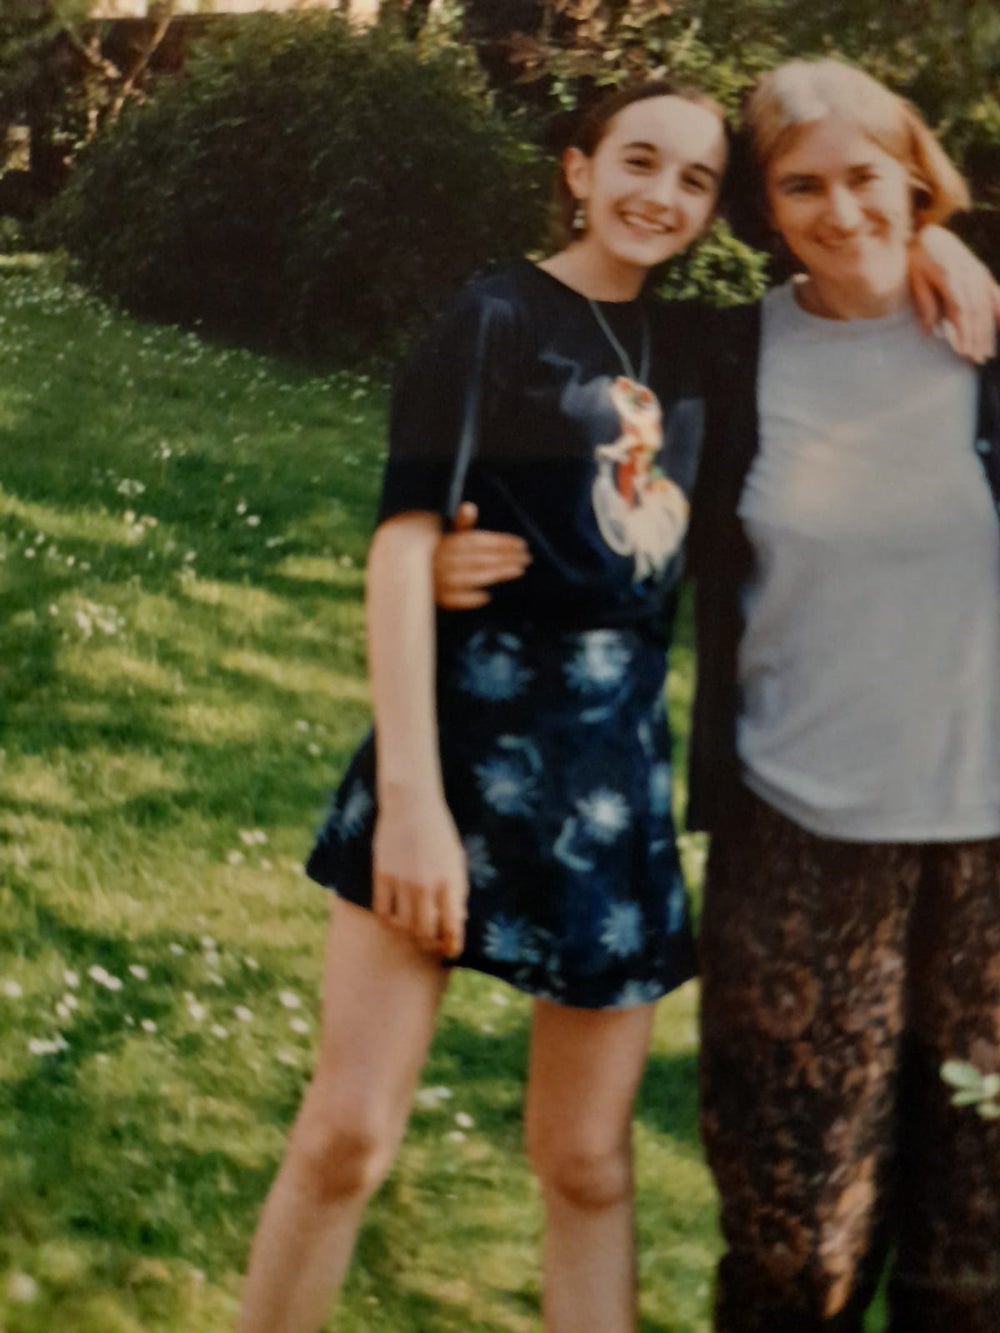 Alison and Elise in the summer of 1997 (Collect/PA Real Life)